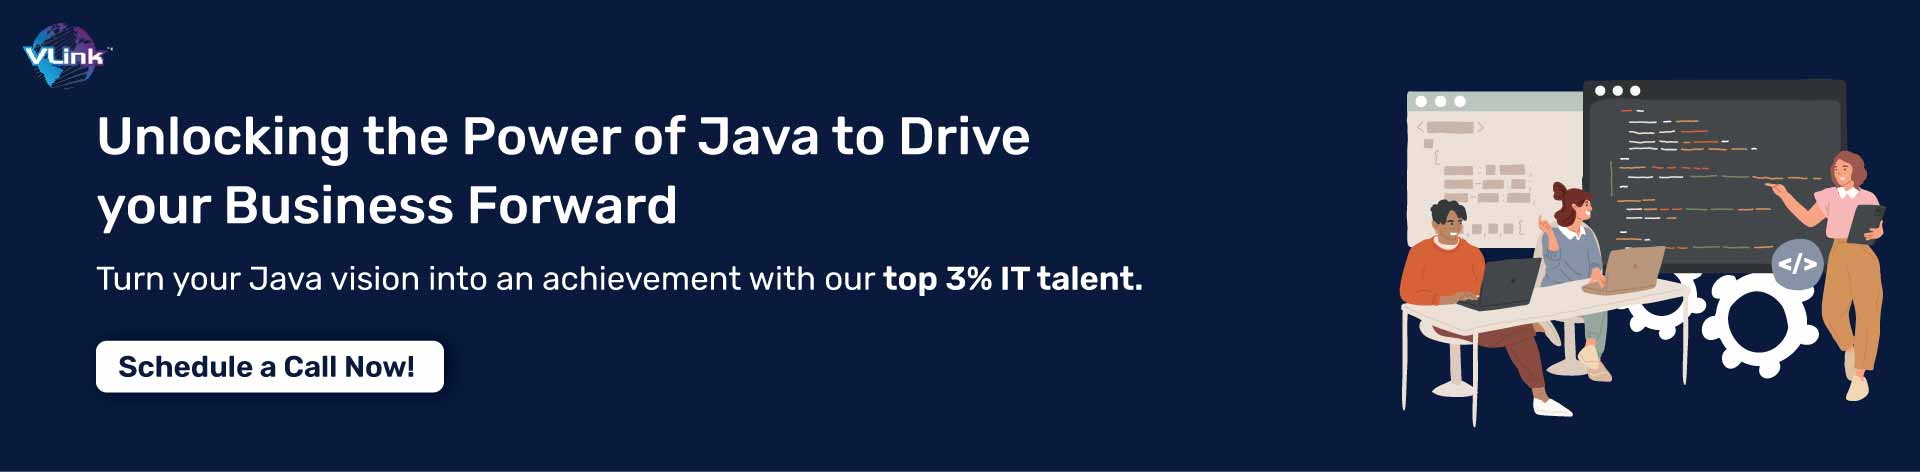 hiring-java-developers-can-enhance-your-software-solutions-cta1